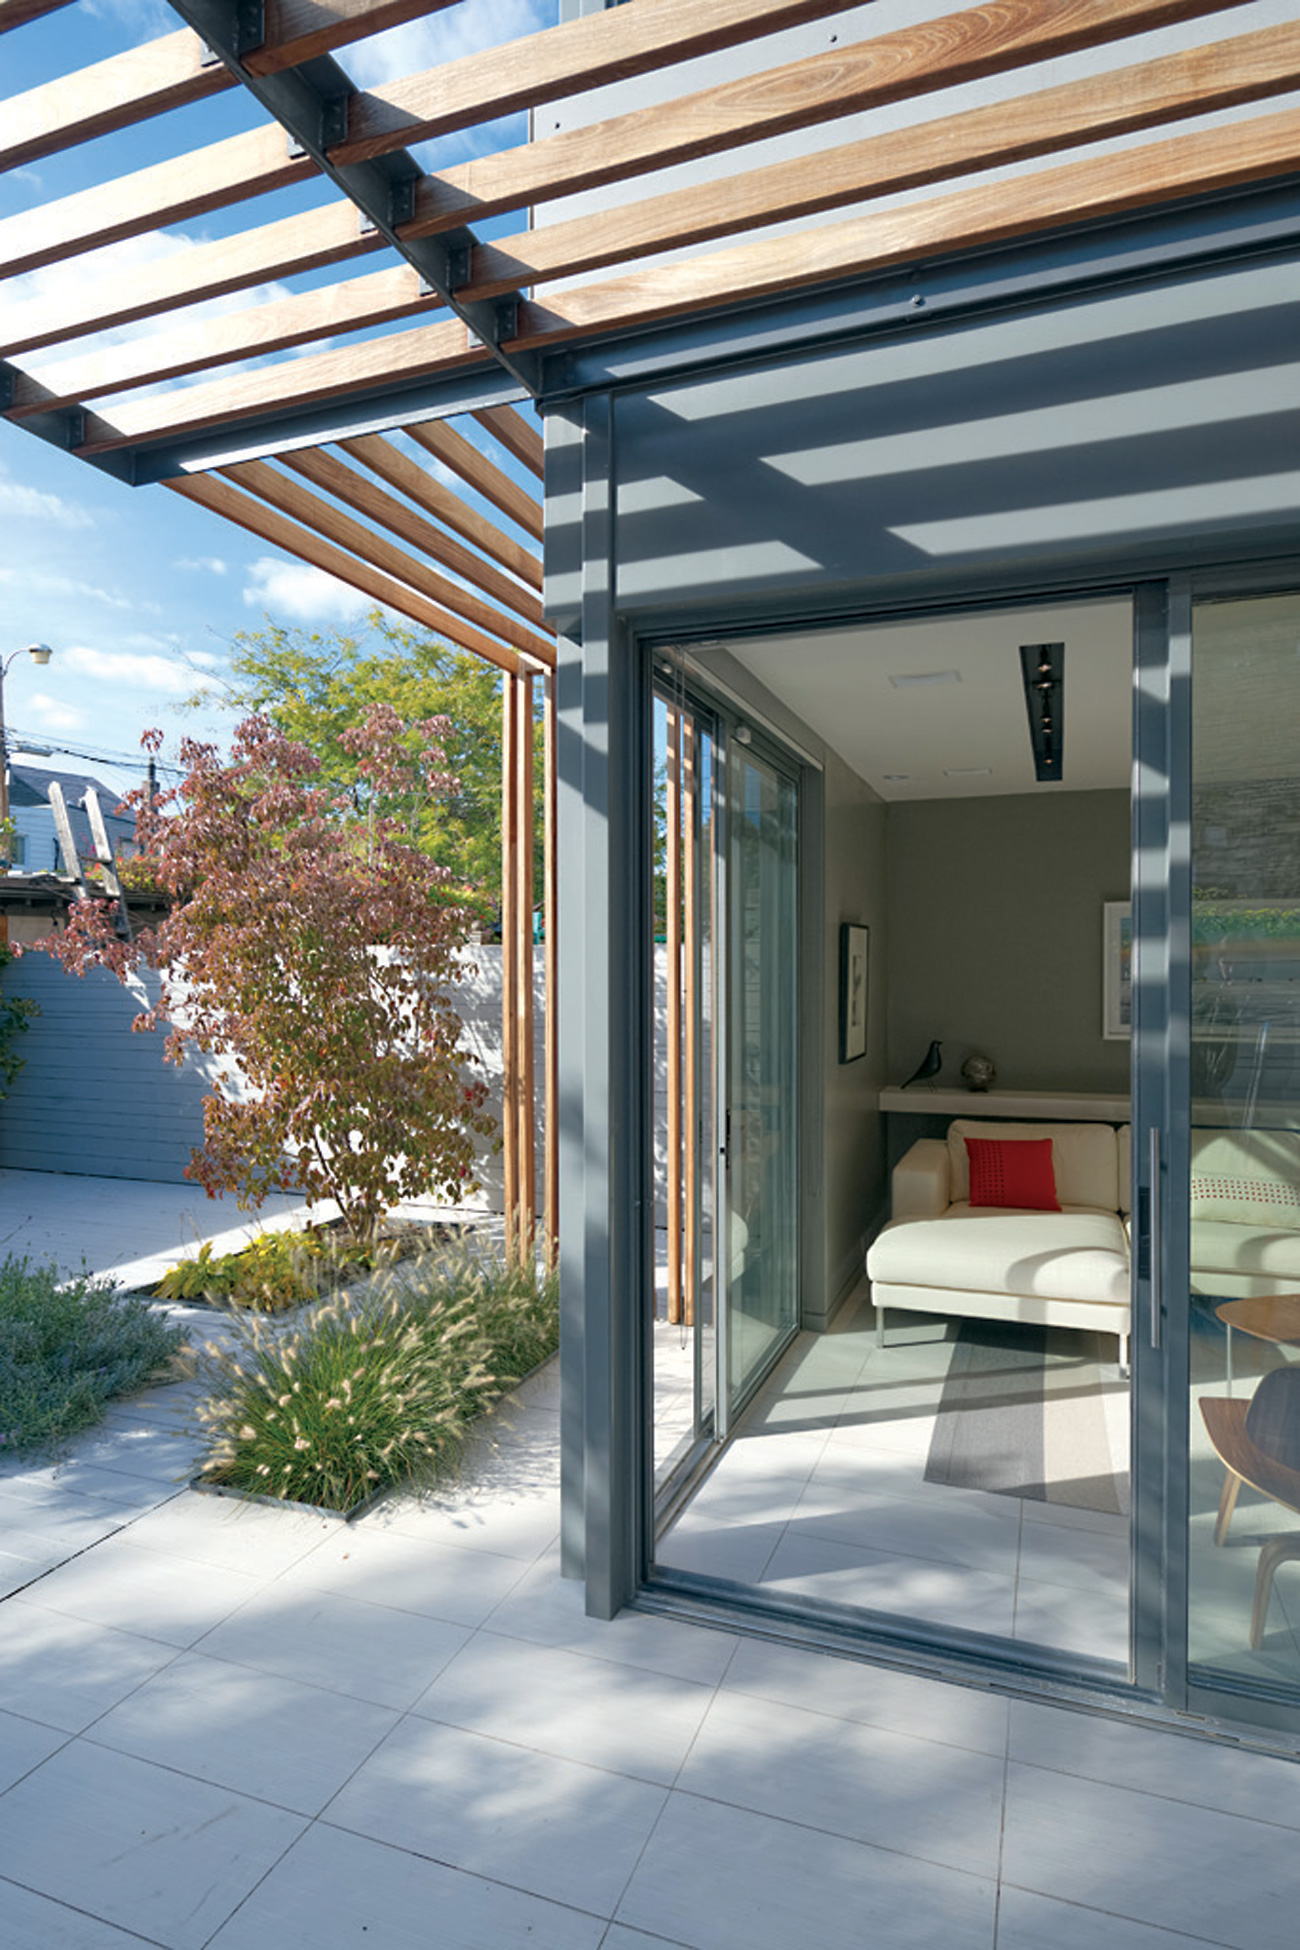 Interior porcelain tile pushes past the sliding doors to the patio. The pergola shades sunken gardens.